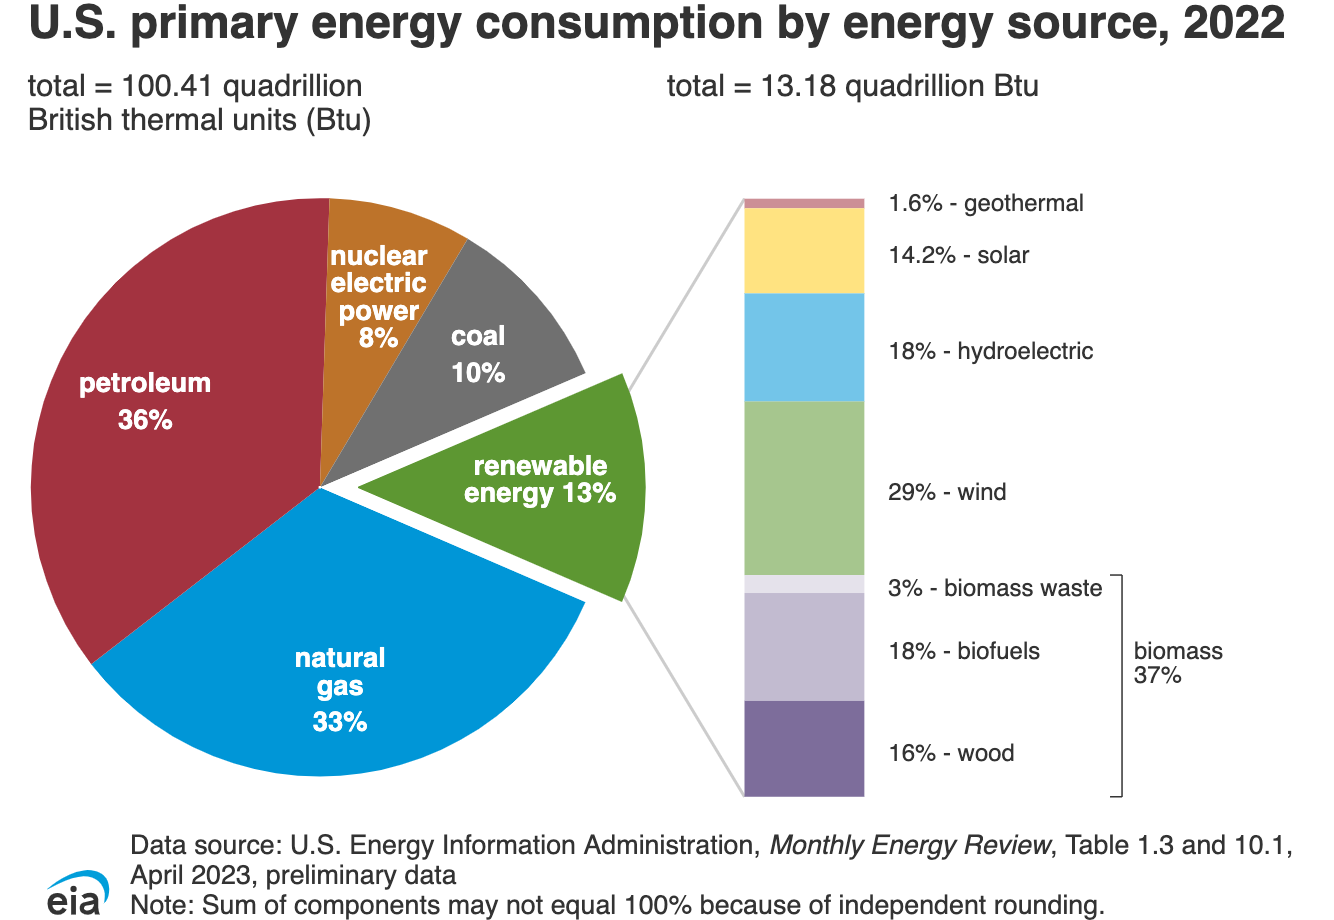 Pie chart showing the percentage of total U.S. energy consumption in 2022 from different energy sources. Renewable energy makes up 13% of energy consumption: 1.6% geothermal, 14.2% solar, 18% hydroelectric, 29% wind, 37% biomass.